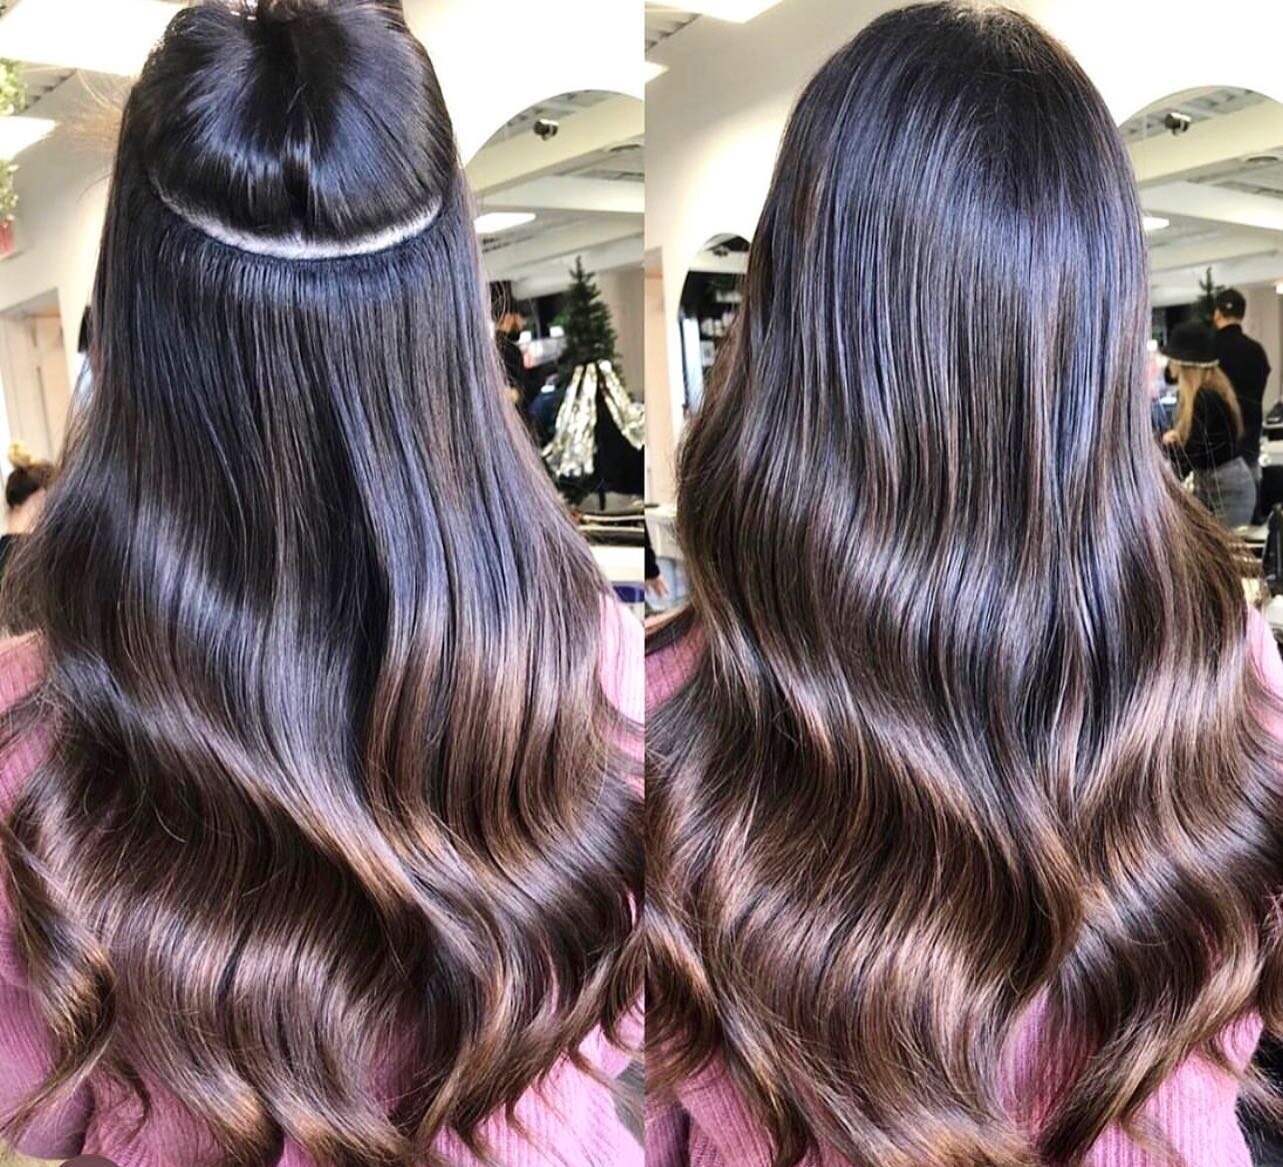 Hand tied weft extensions now available with @hairrby.kylee ! I&rsquo;m addition to tape in extensions we now offer this great installation process to add length and volume. We are also offering 50% OFF the install price for the month of December, on